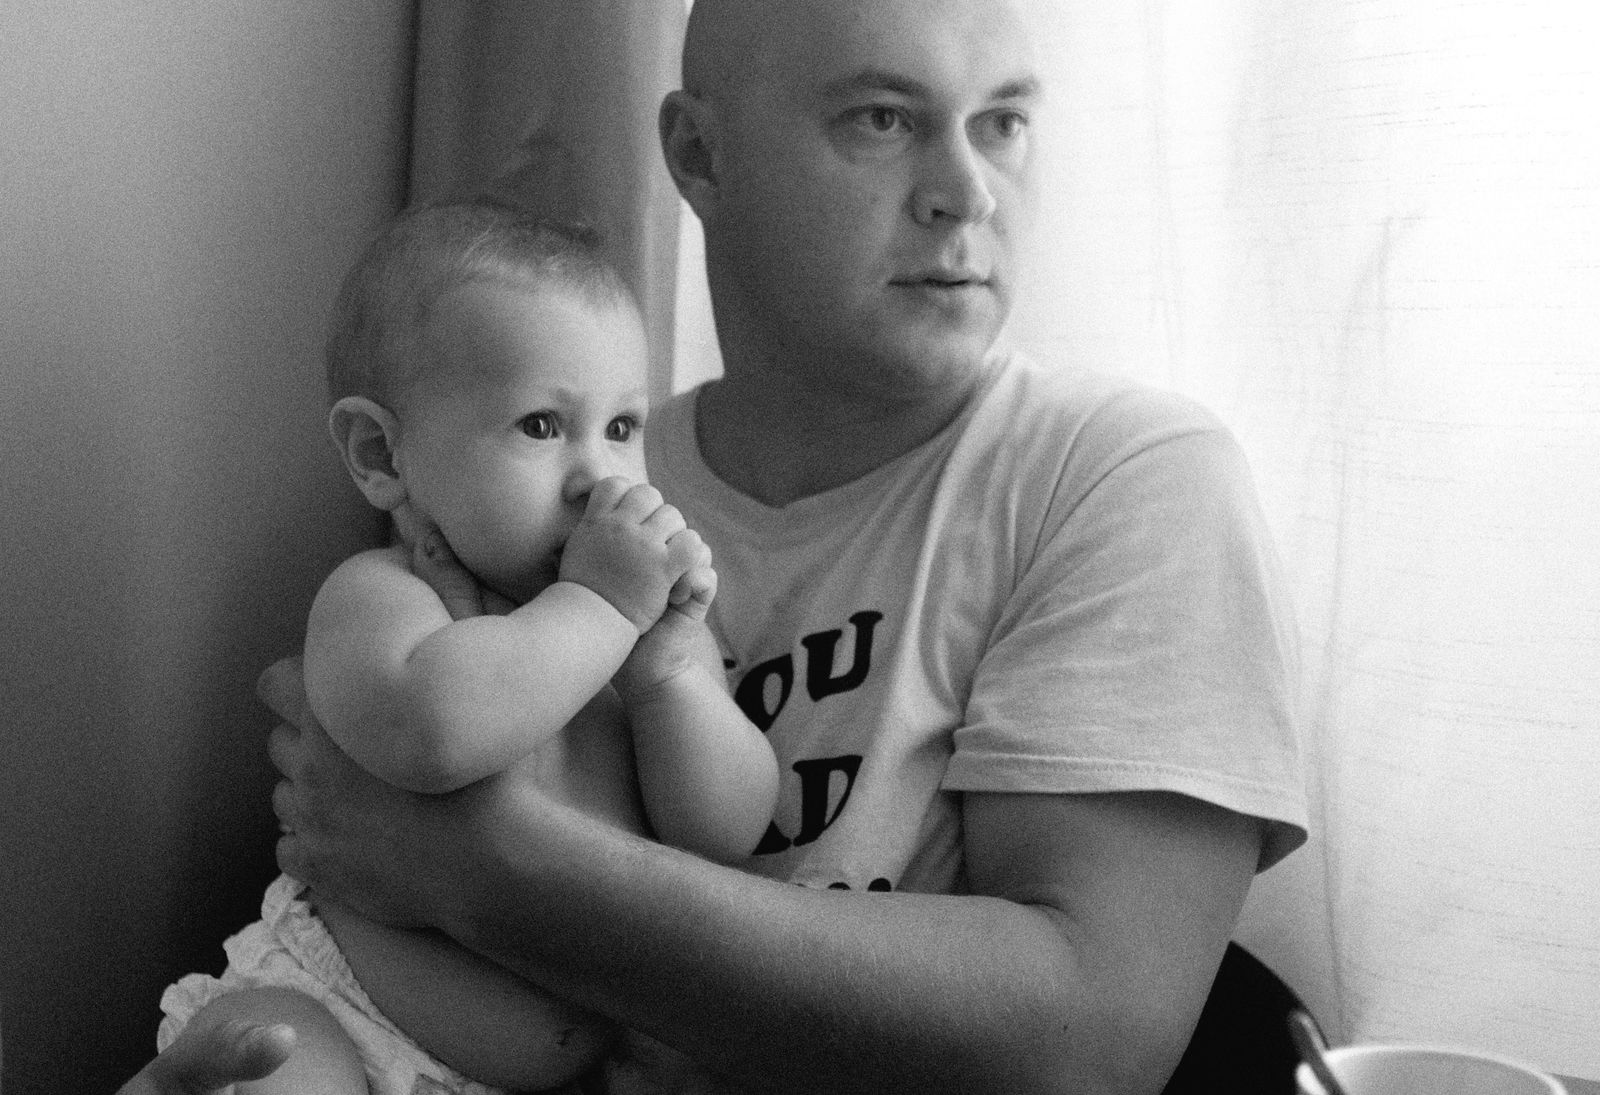 © Olga Bushkova - Image from the How i tried to convince my husband to have children photography project